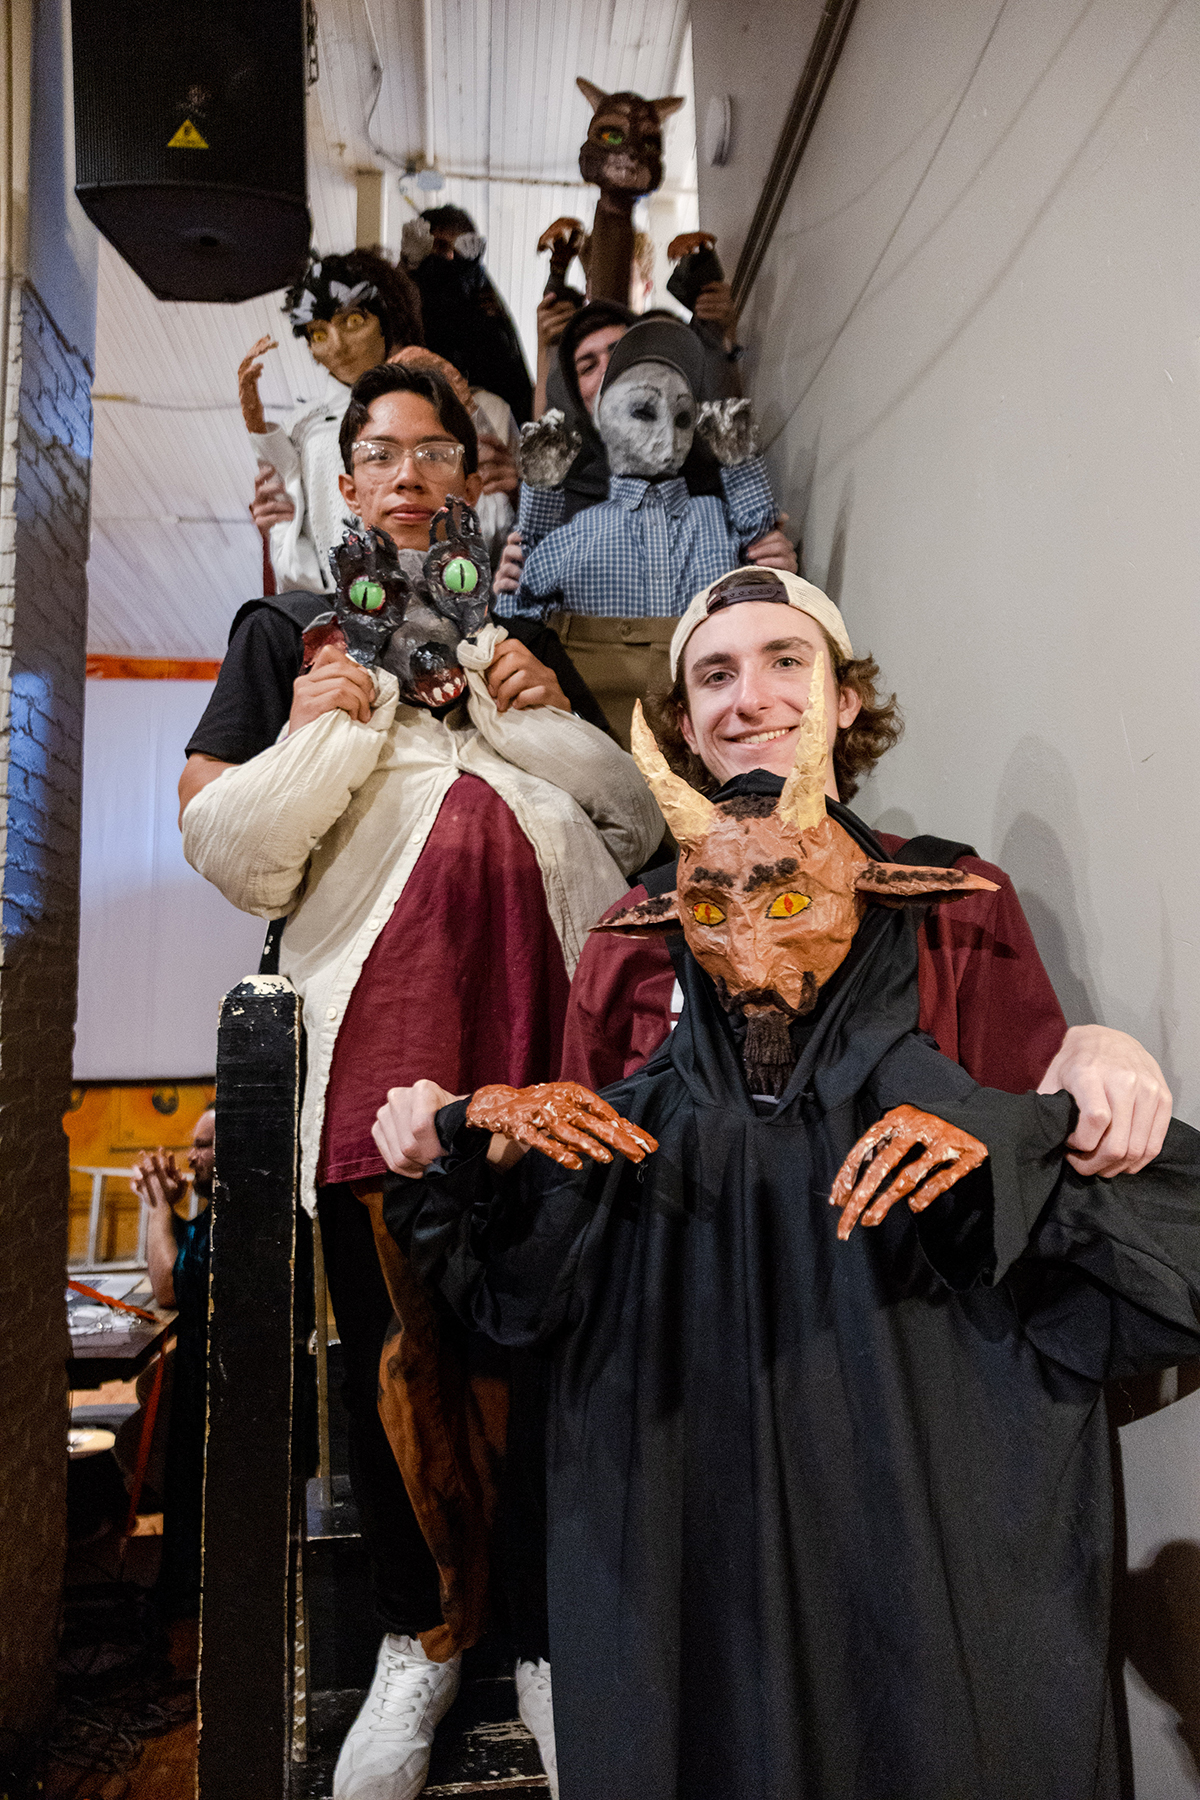 A group of college students stand on a staircase, each holding a puppet they made that connect to local folklore stories.